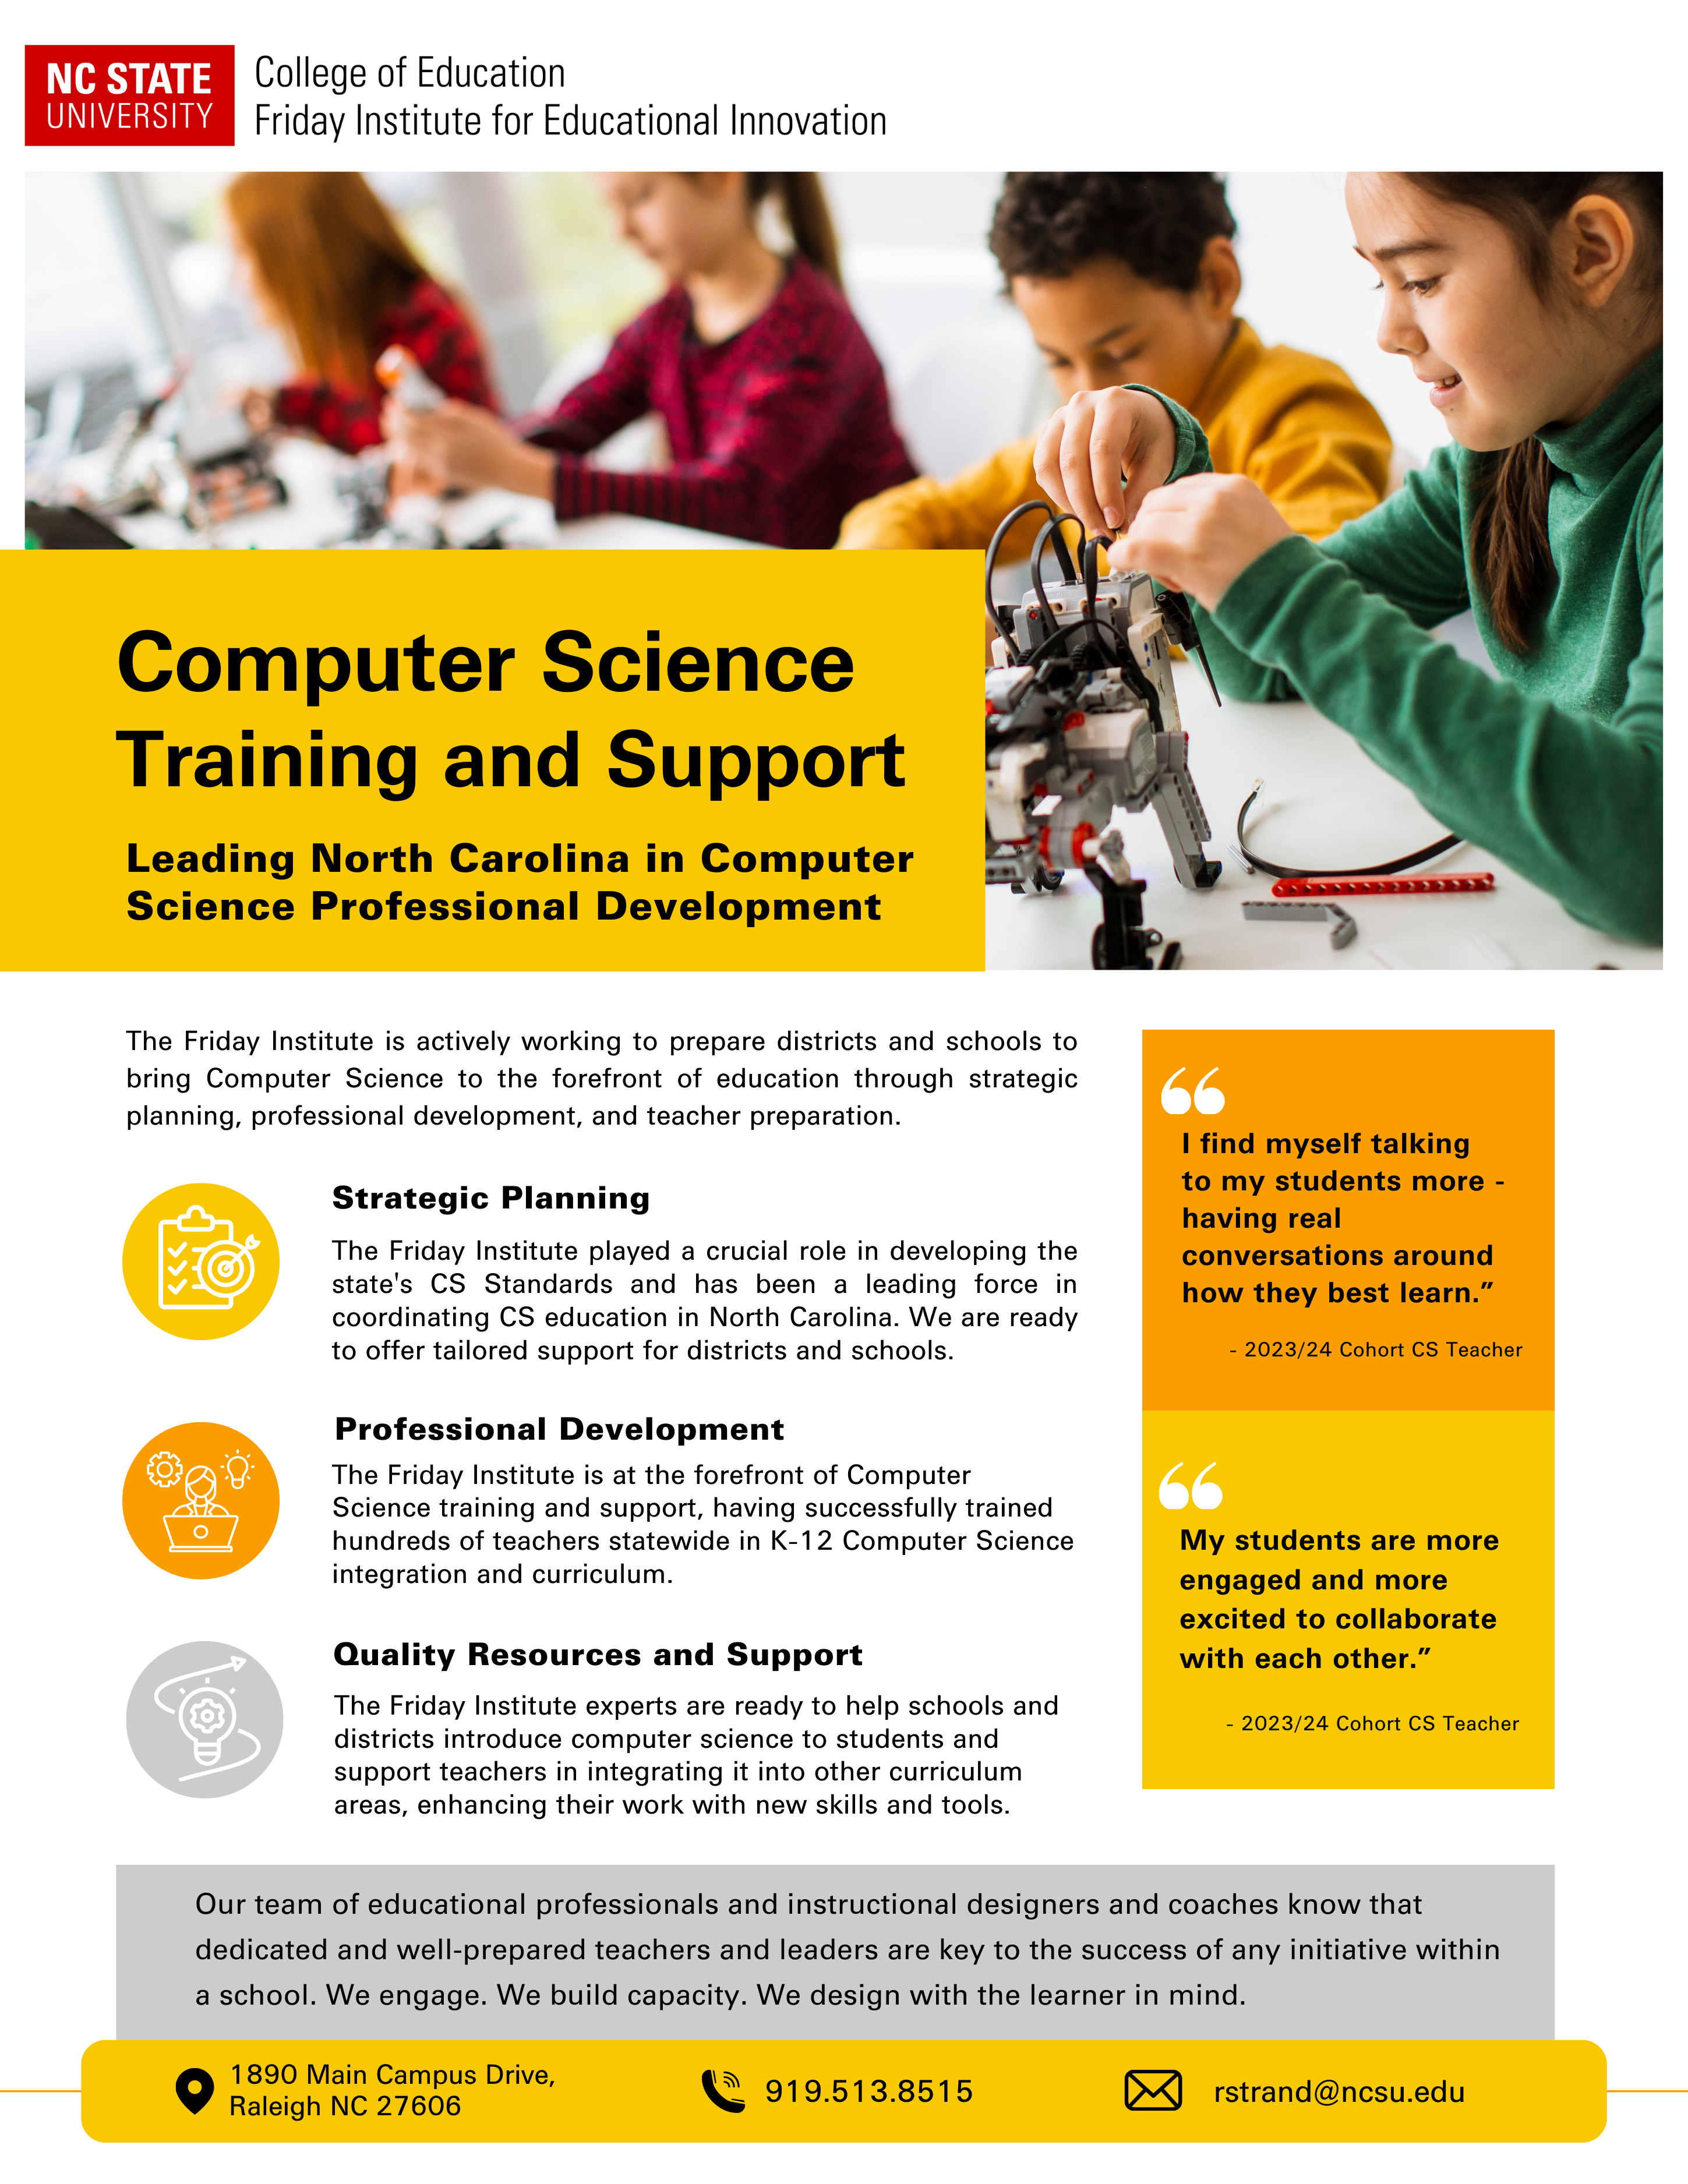 Computer Science Training and Support Handout highlight core features including strategic planning, professional development and quality resources and support